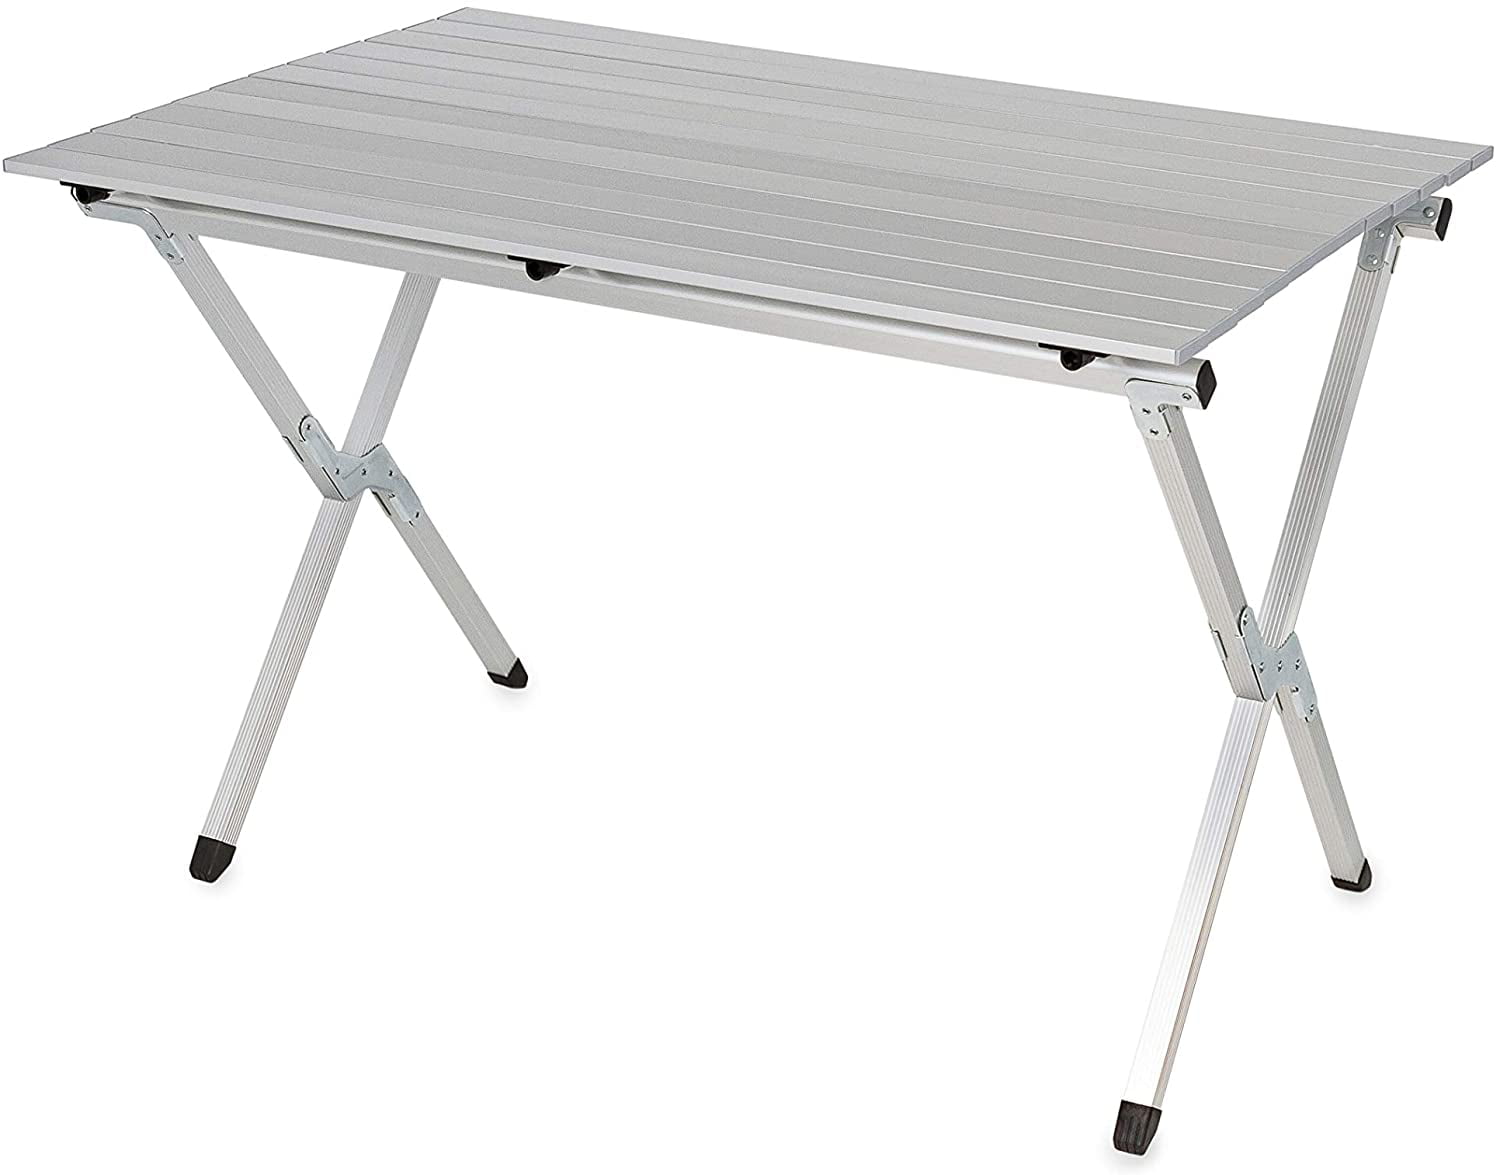 Cam Camco Adirondack Portable Outdoor Folding Side Table Perfect For The Beach 